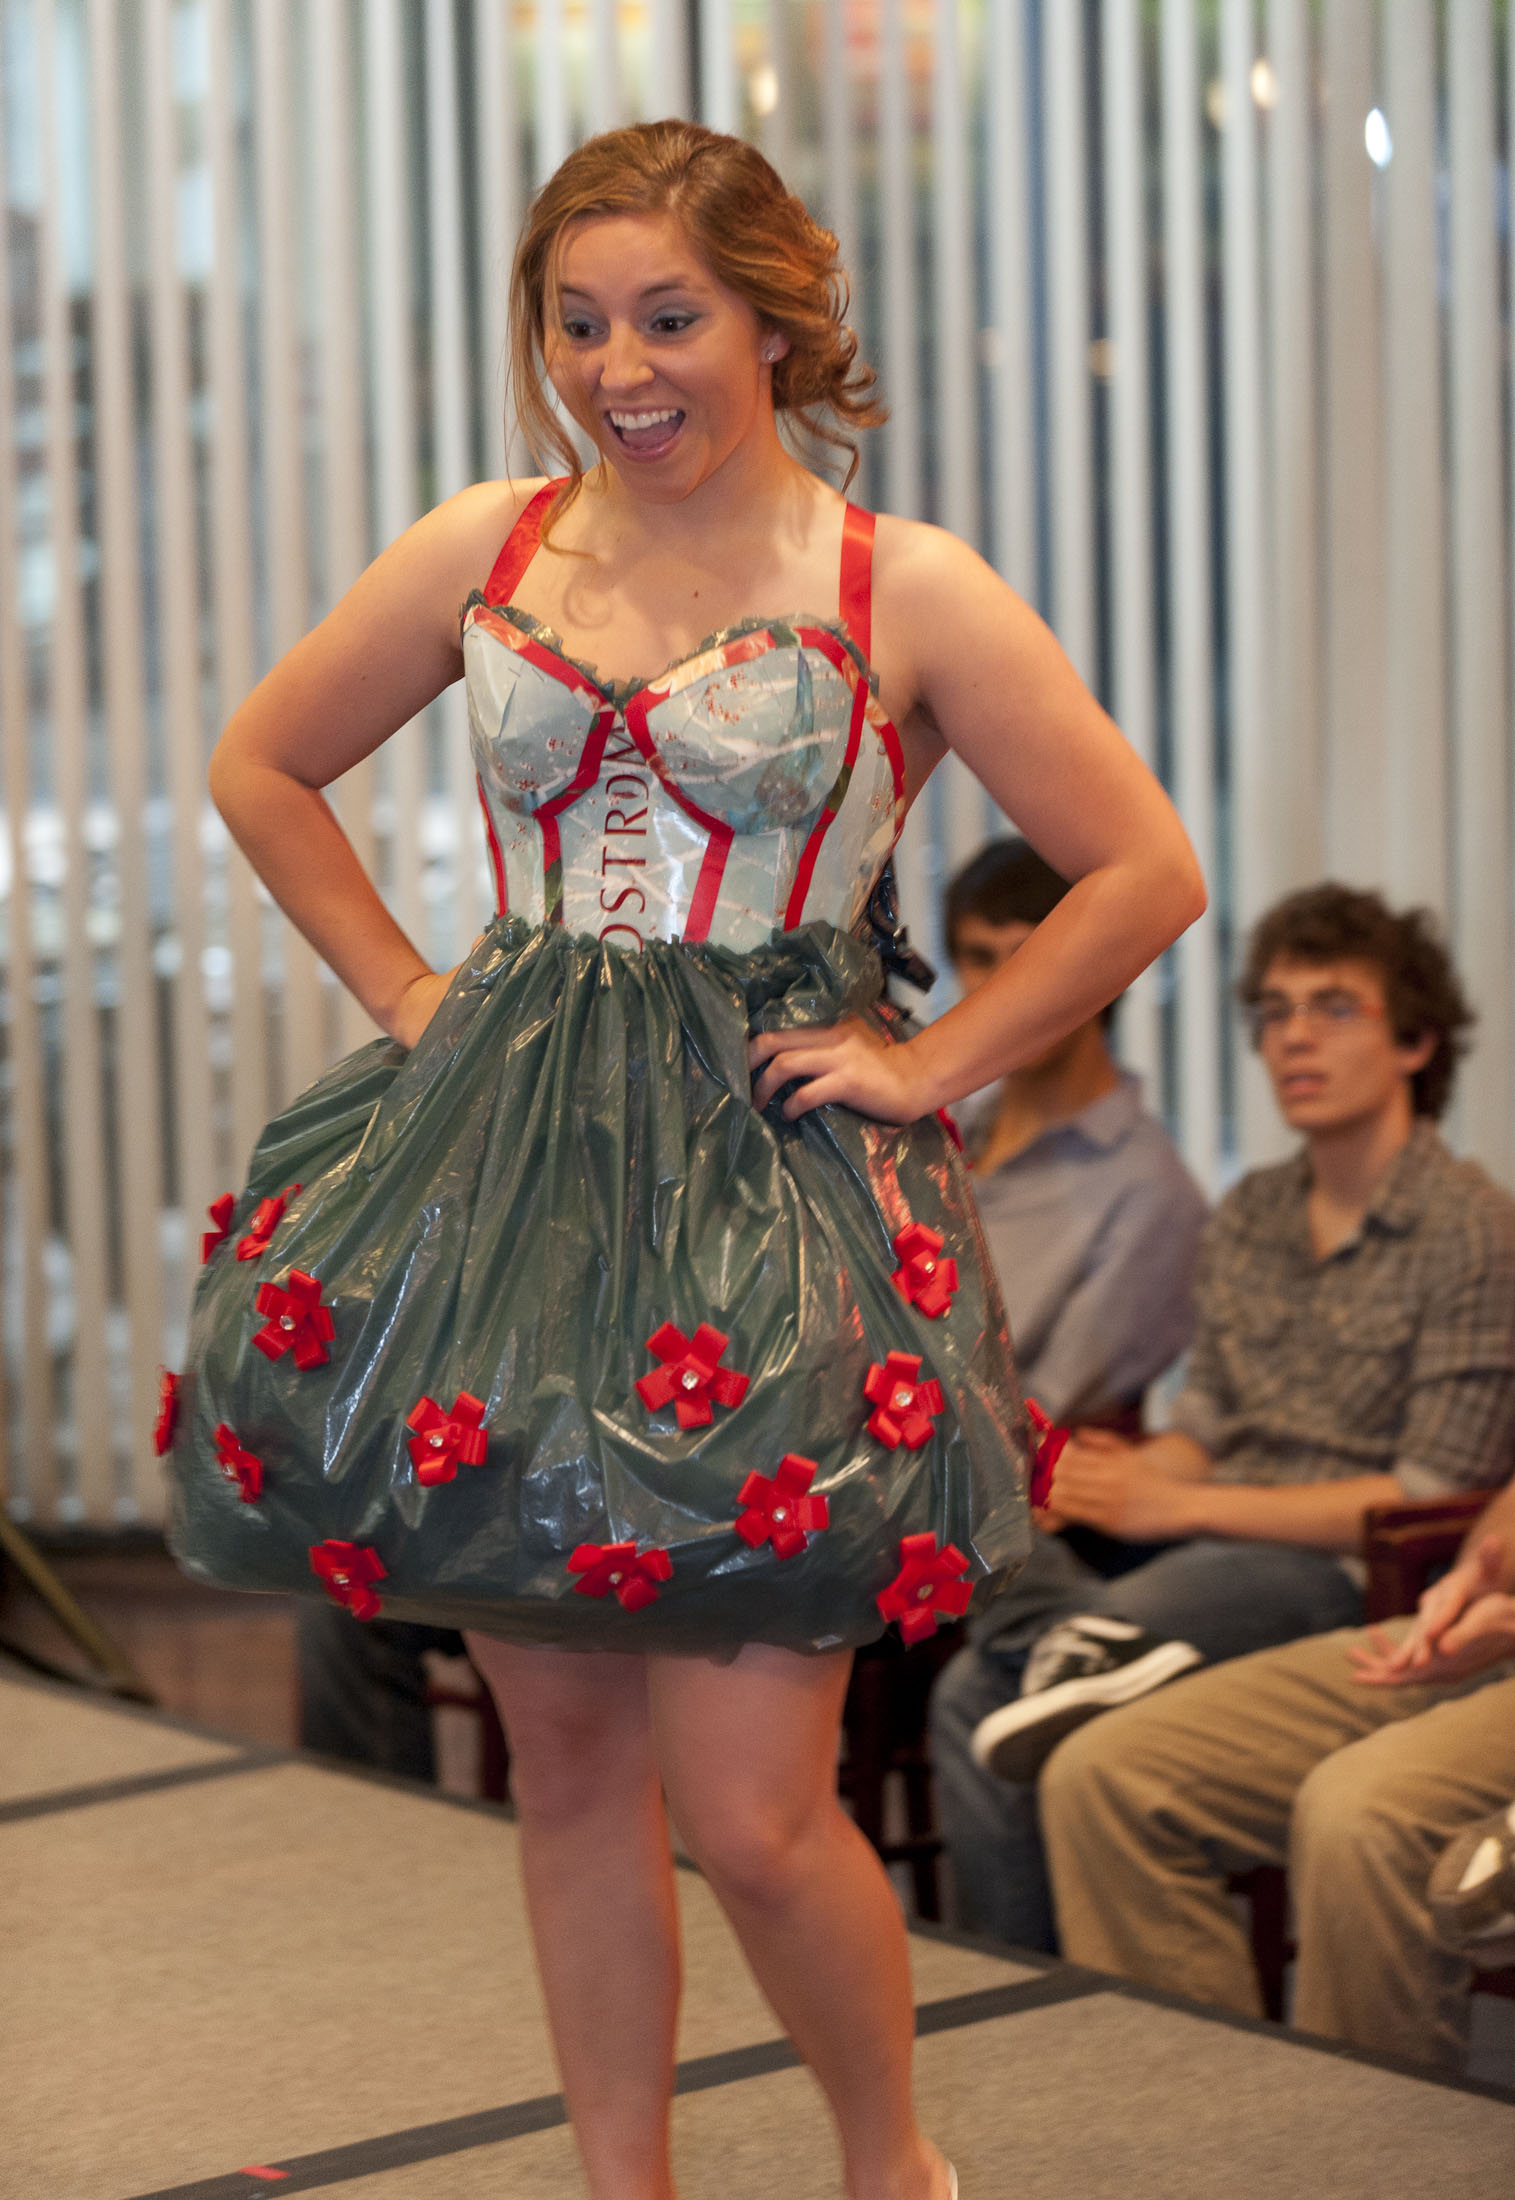 First-year business student Blaire Bogard graces the catwalk with this bubble dress made by Alessandra Shultz, also a first-year business student.